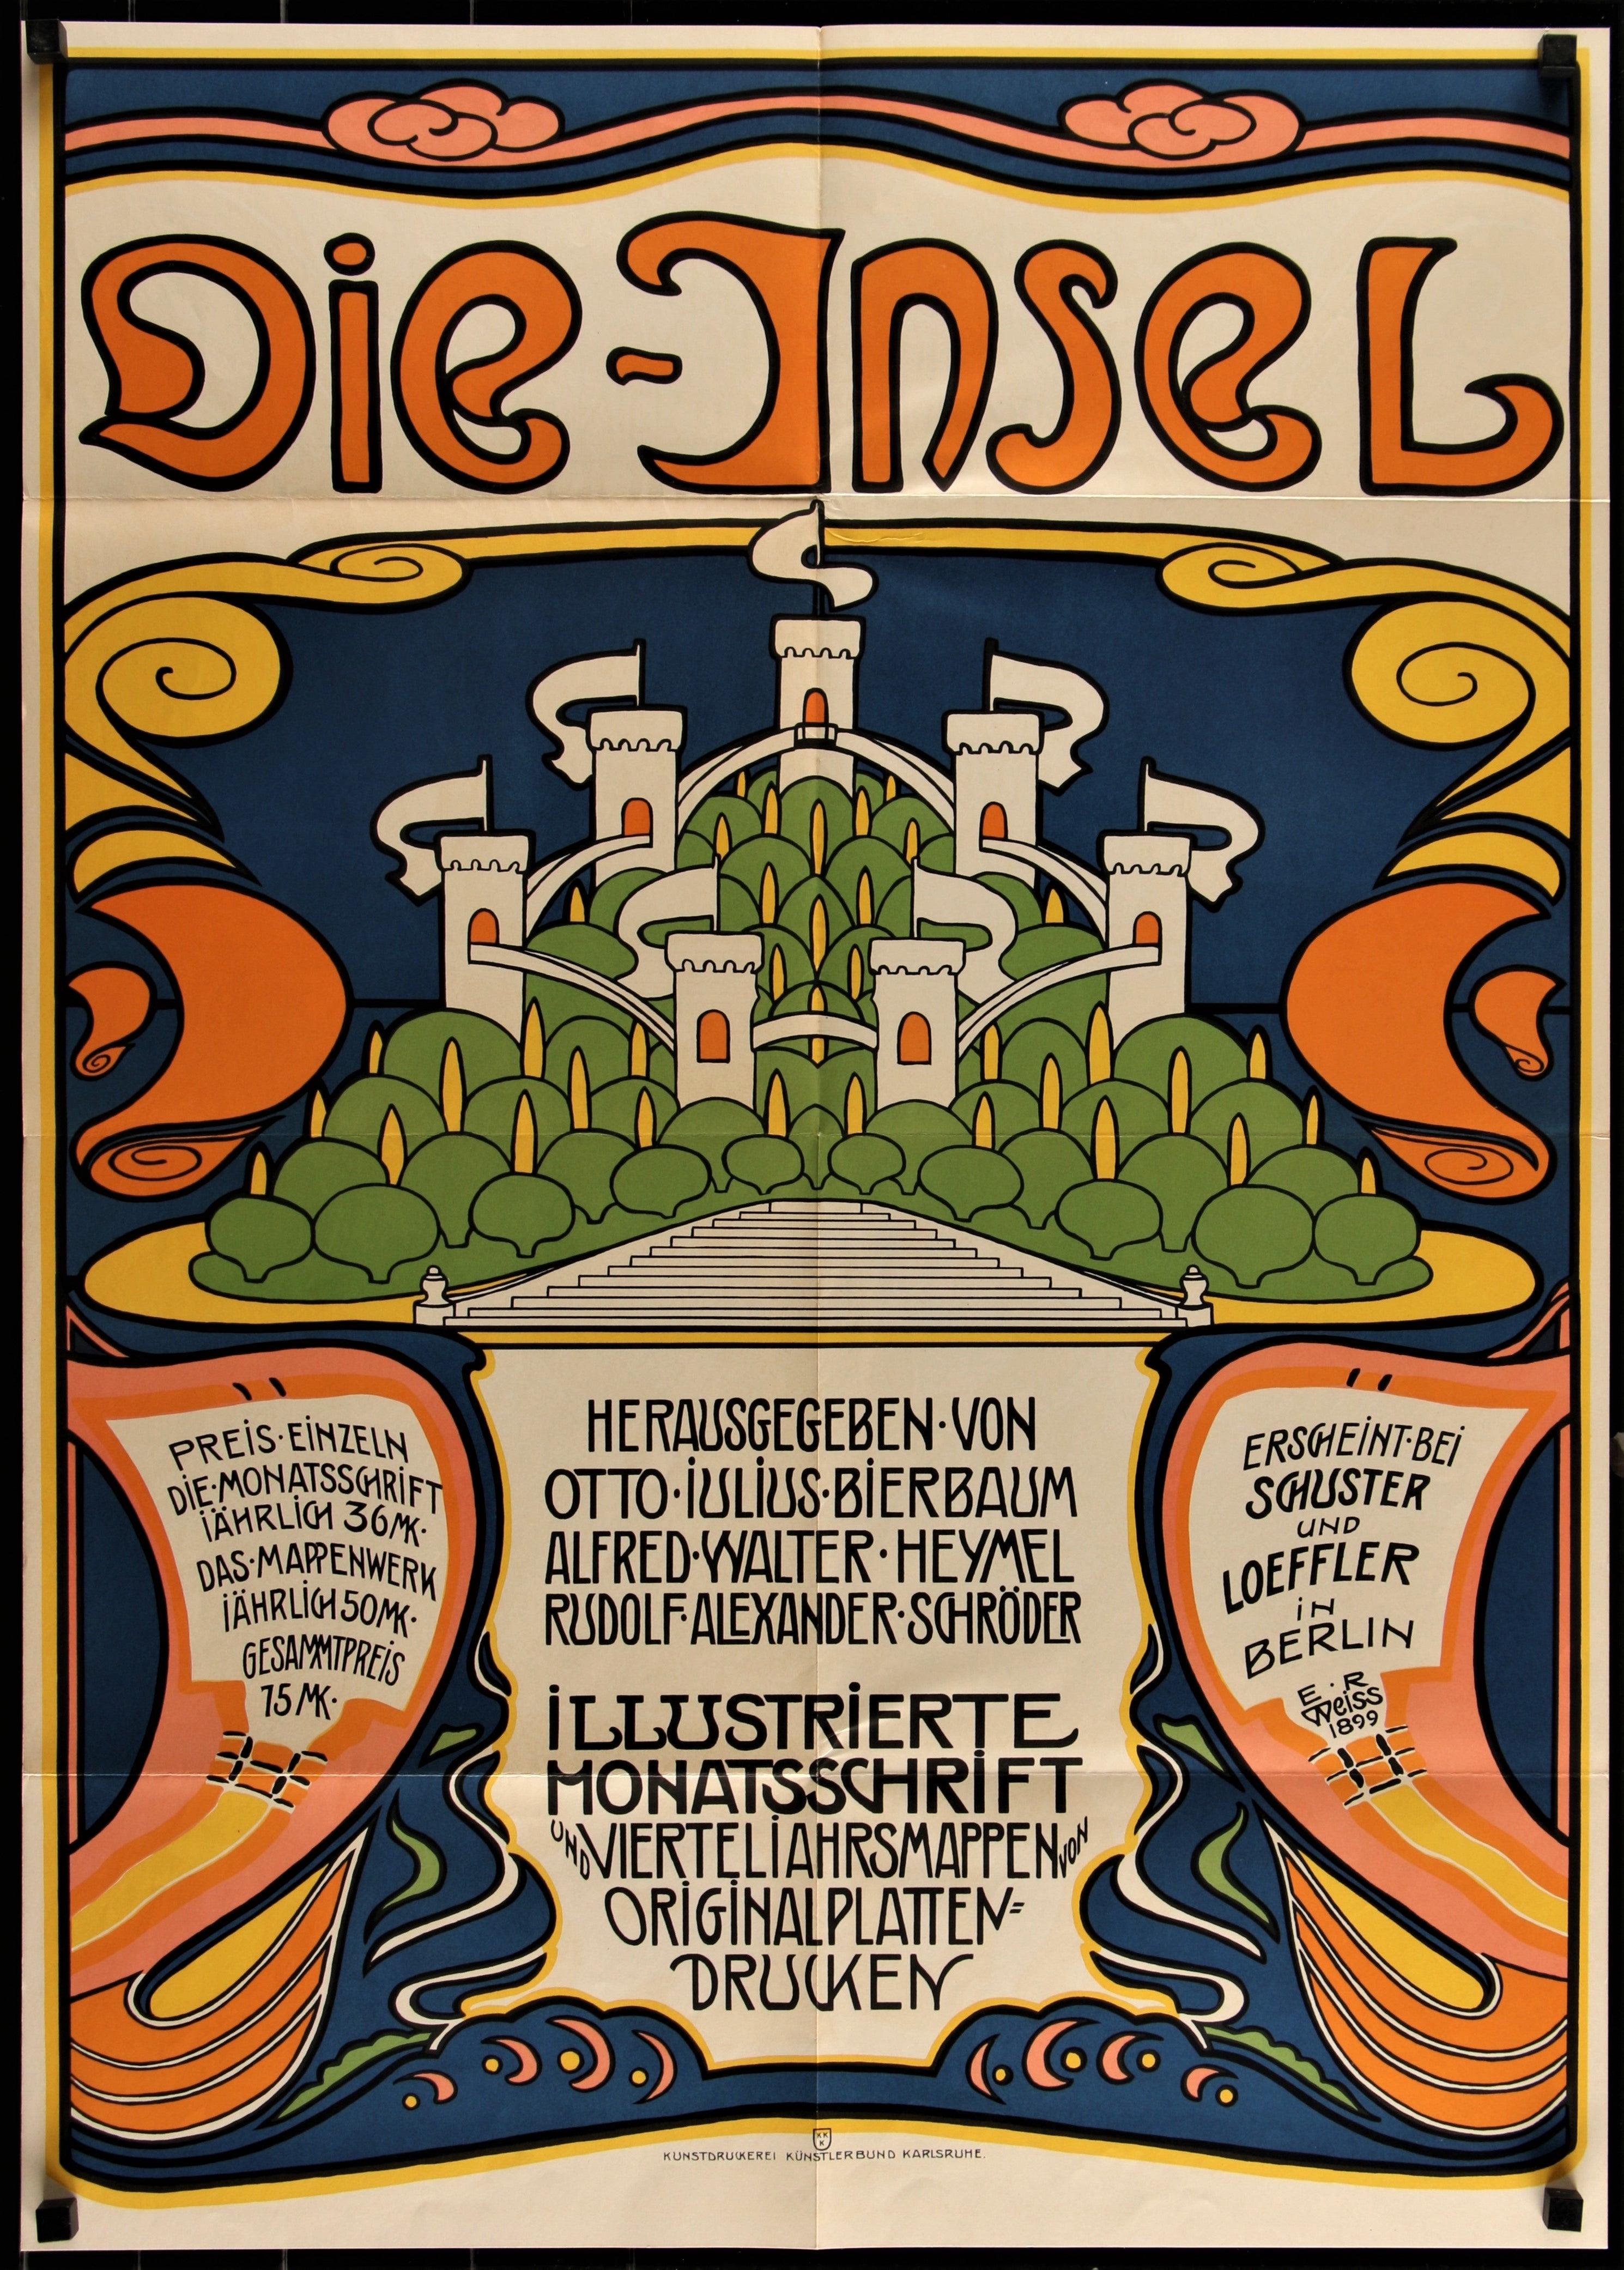 Authentic Vintage Poster | Die-Insel by Emil Rudolph Weiss